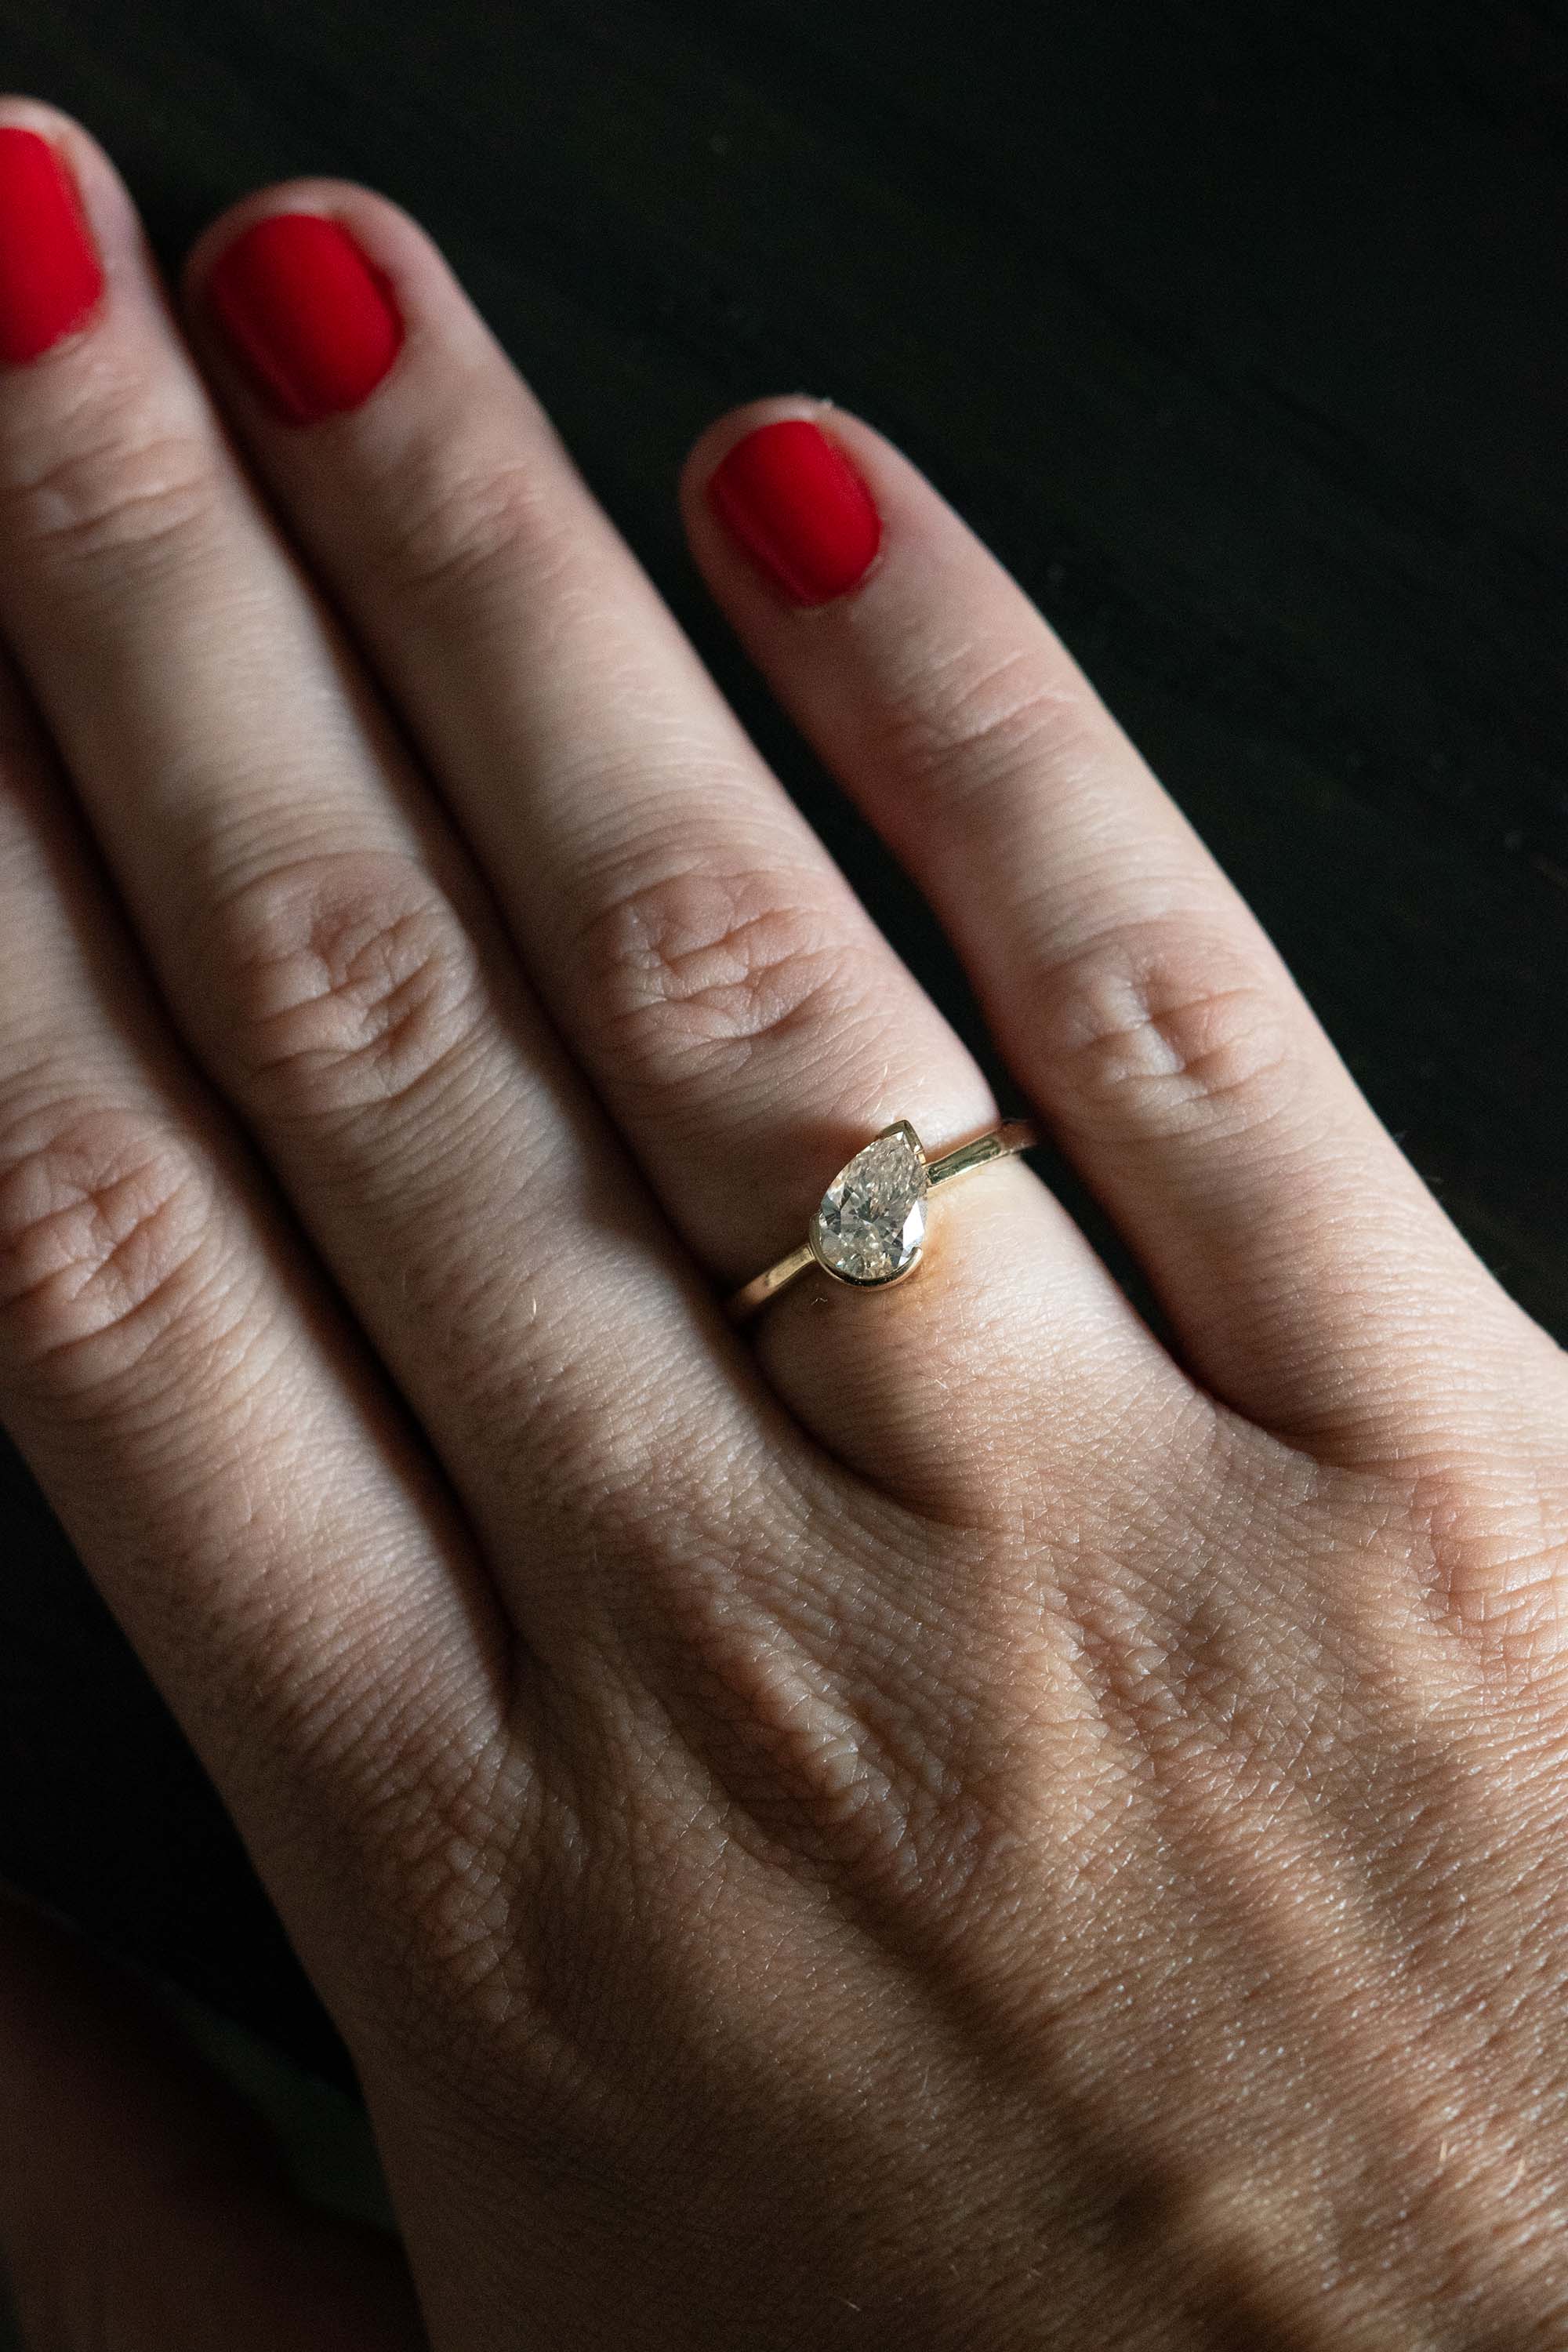 Shelter Anniversary Collection: One Of A Kind Lab Diamond Pear Ring